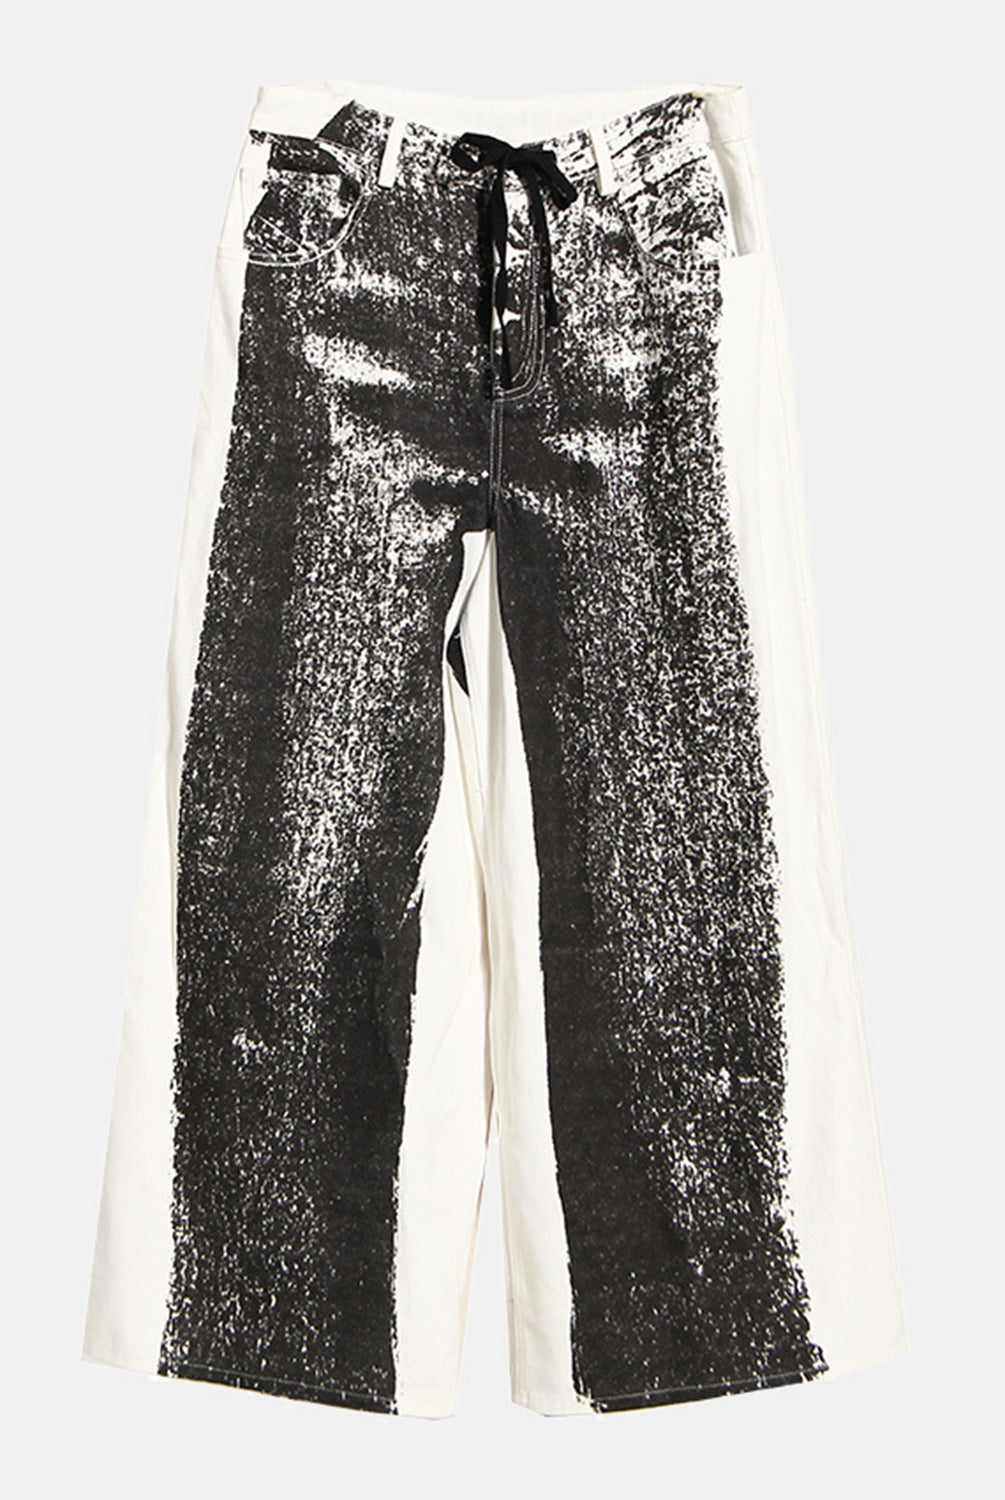 Trend-setting high-waisted wide-leg black jeans with a distinctive white contrast stripe and frayed hems for a chic, contemporary look.